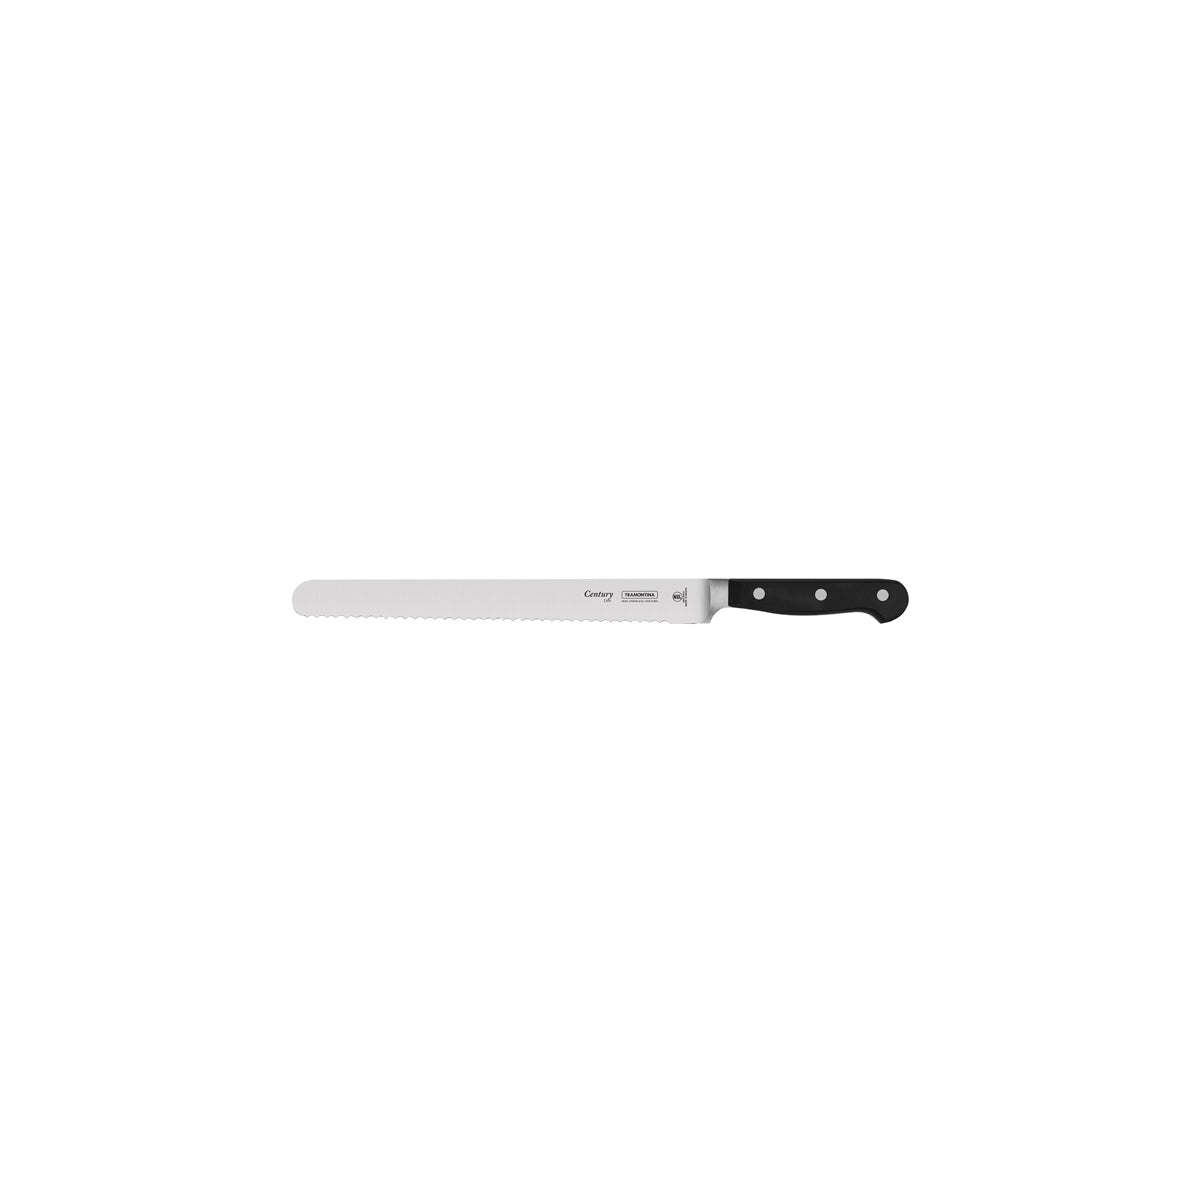 TM24012/110 Tramontina Century Pastry Knife Serrated Blade with Forged Handle Black 254mm Tomkin Australia Hospitality Supplies